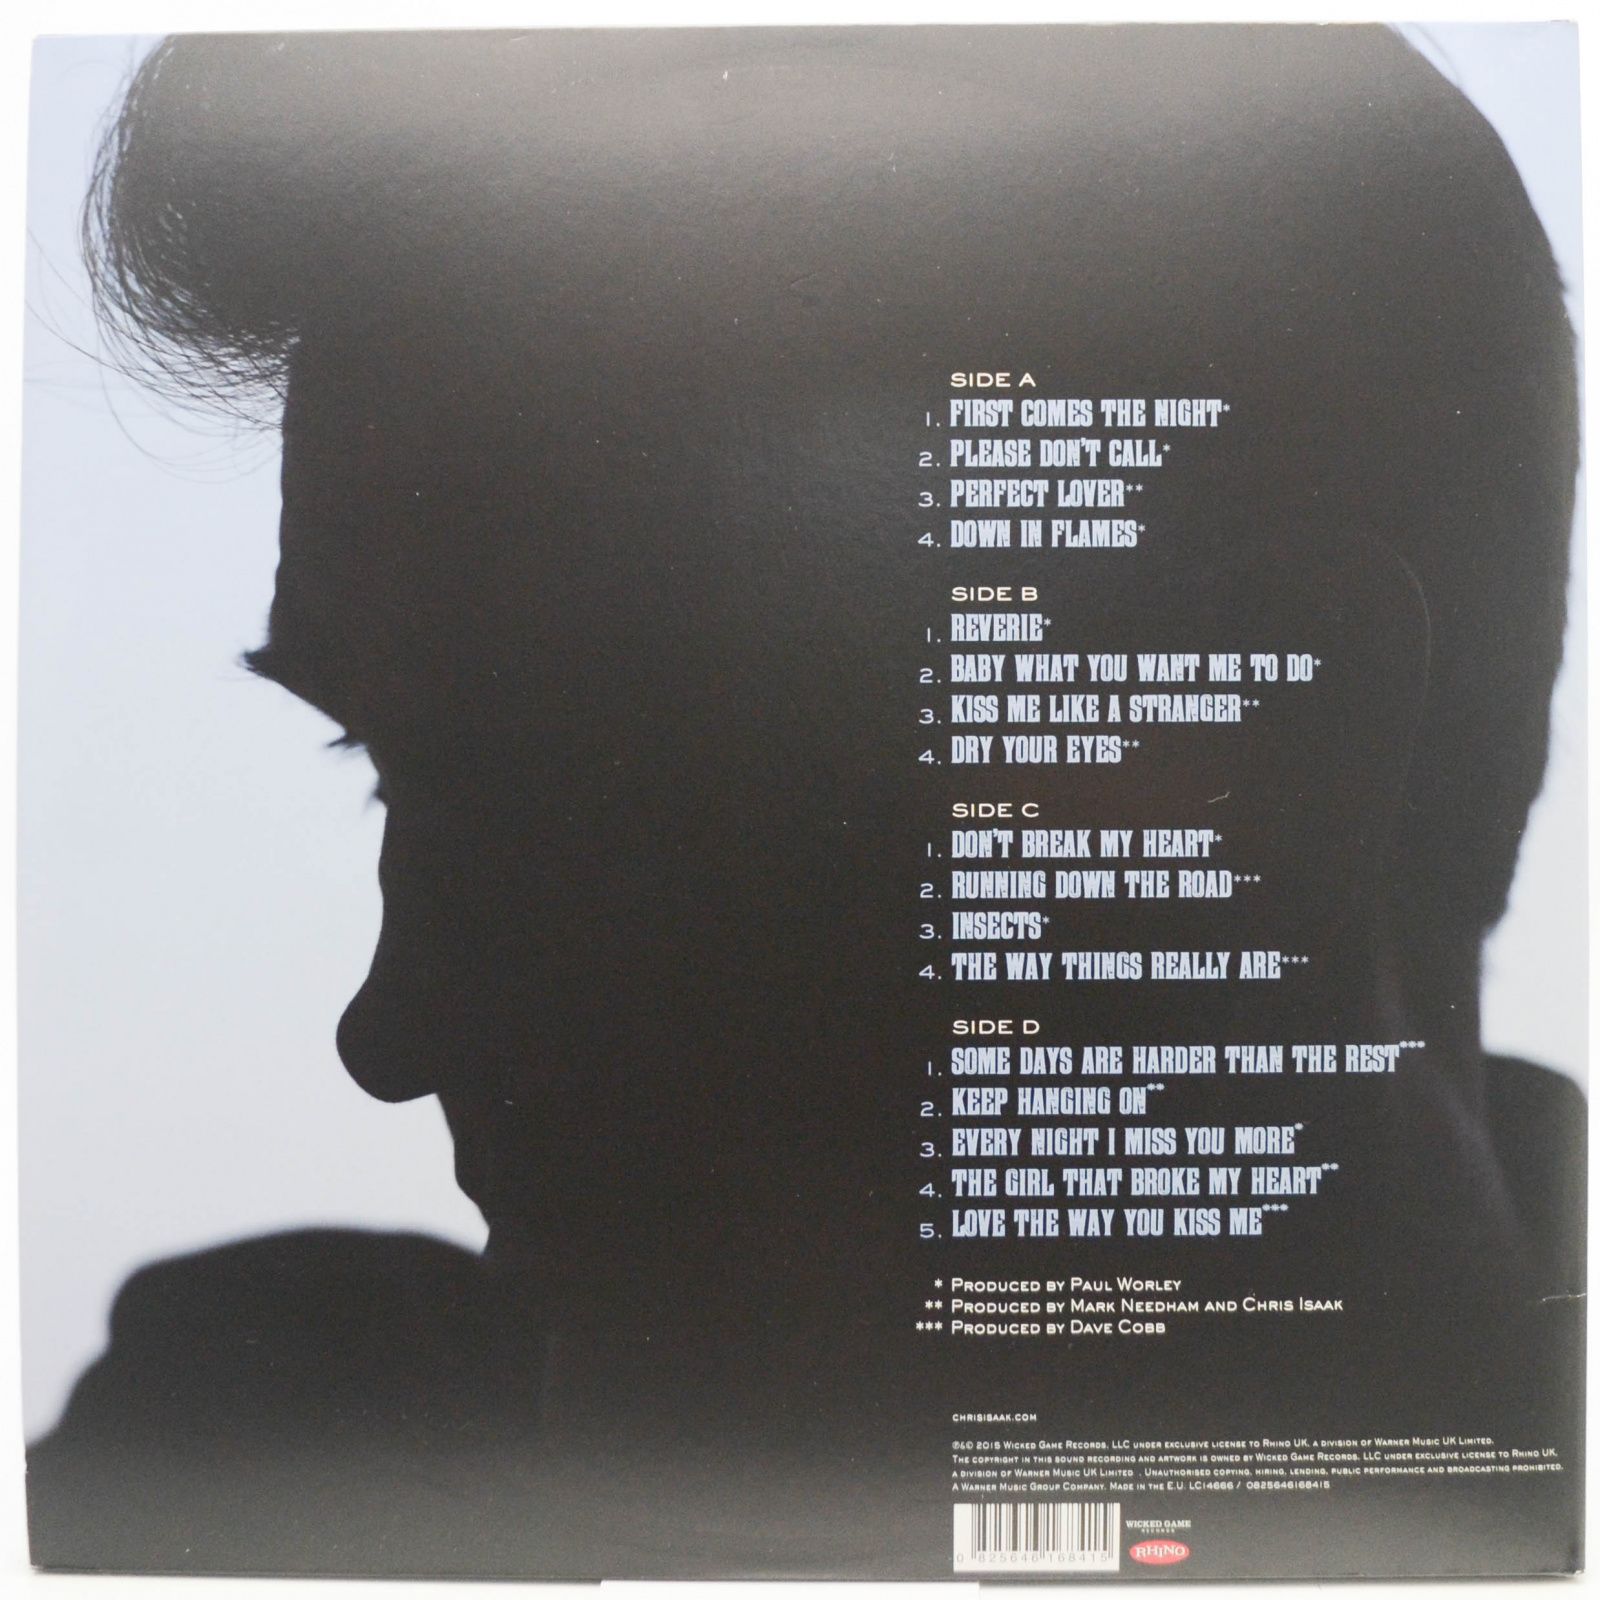 Chris Isaak — First Comes The Night (2LP), 2015